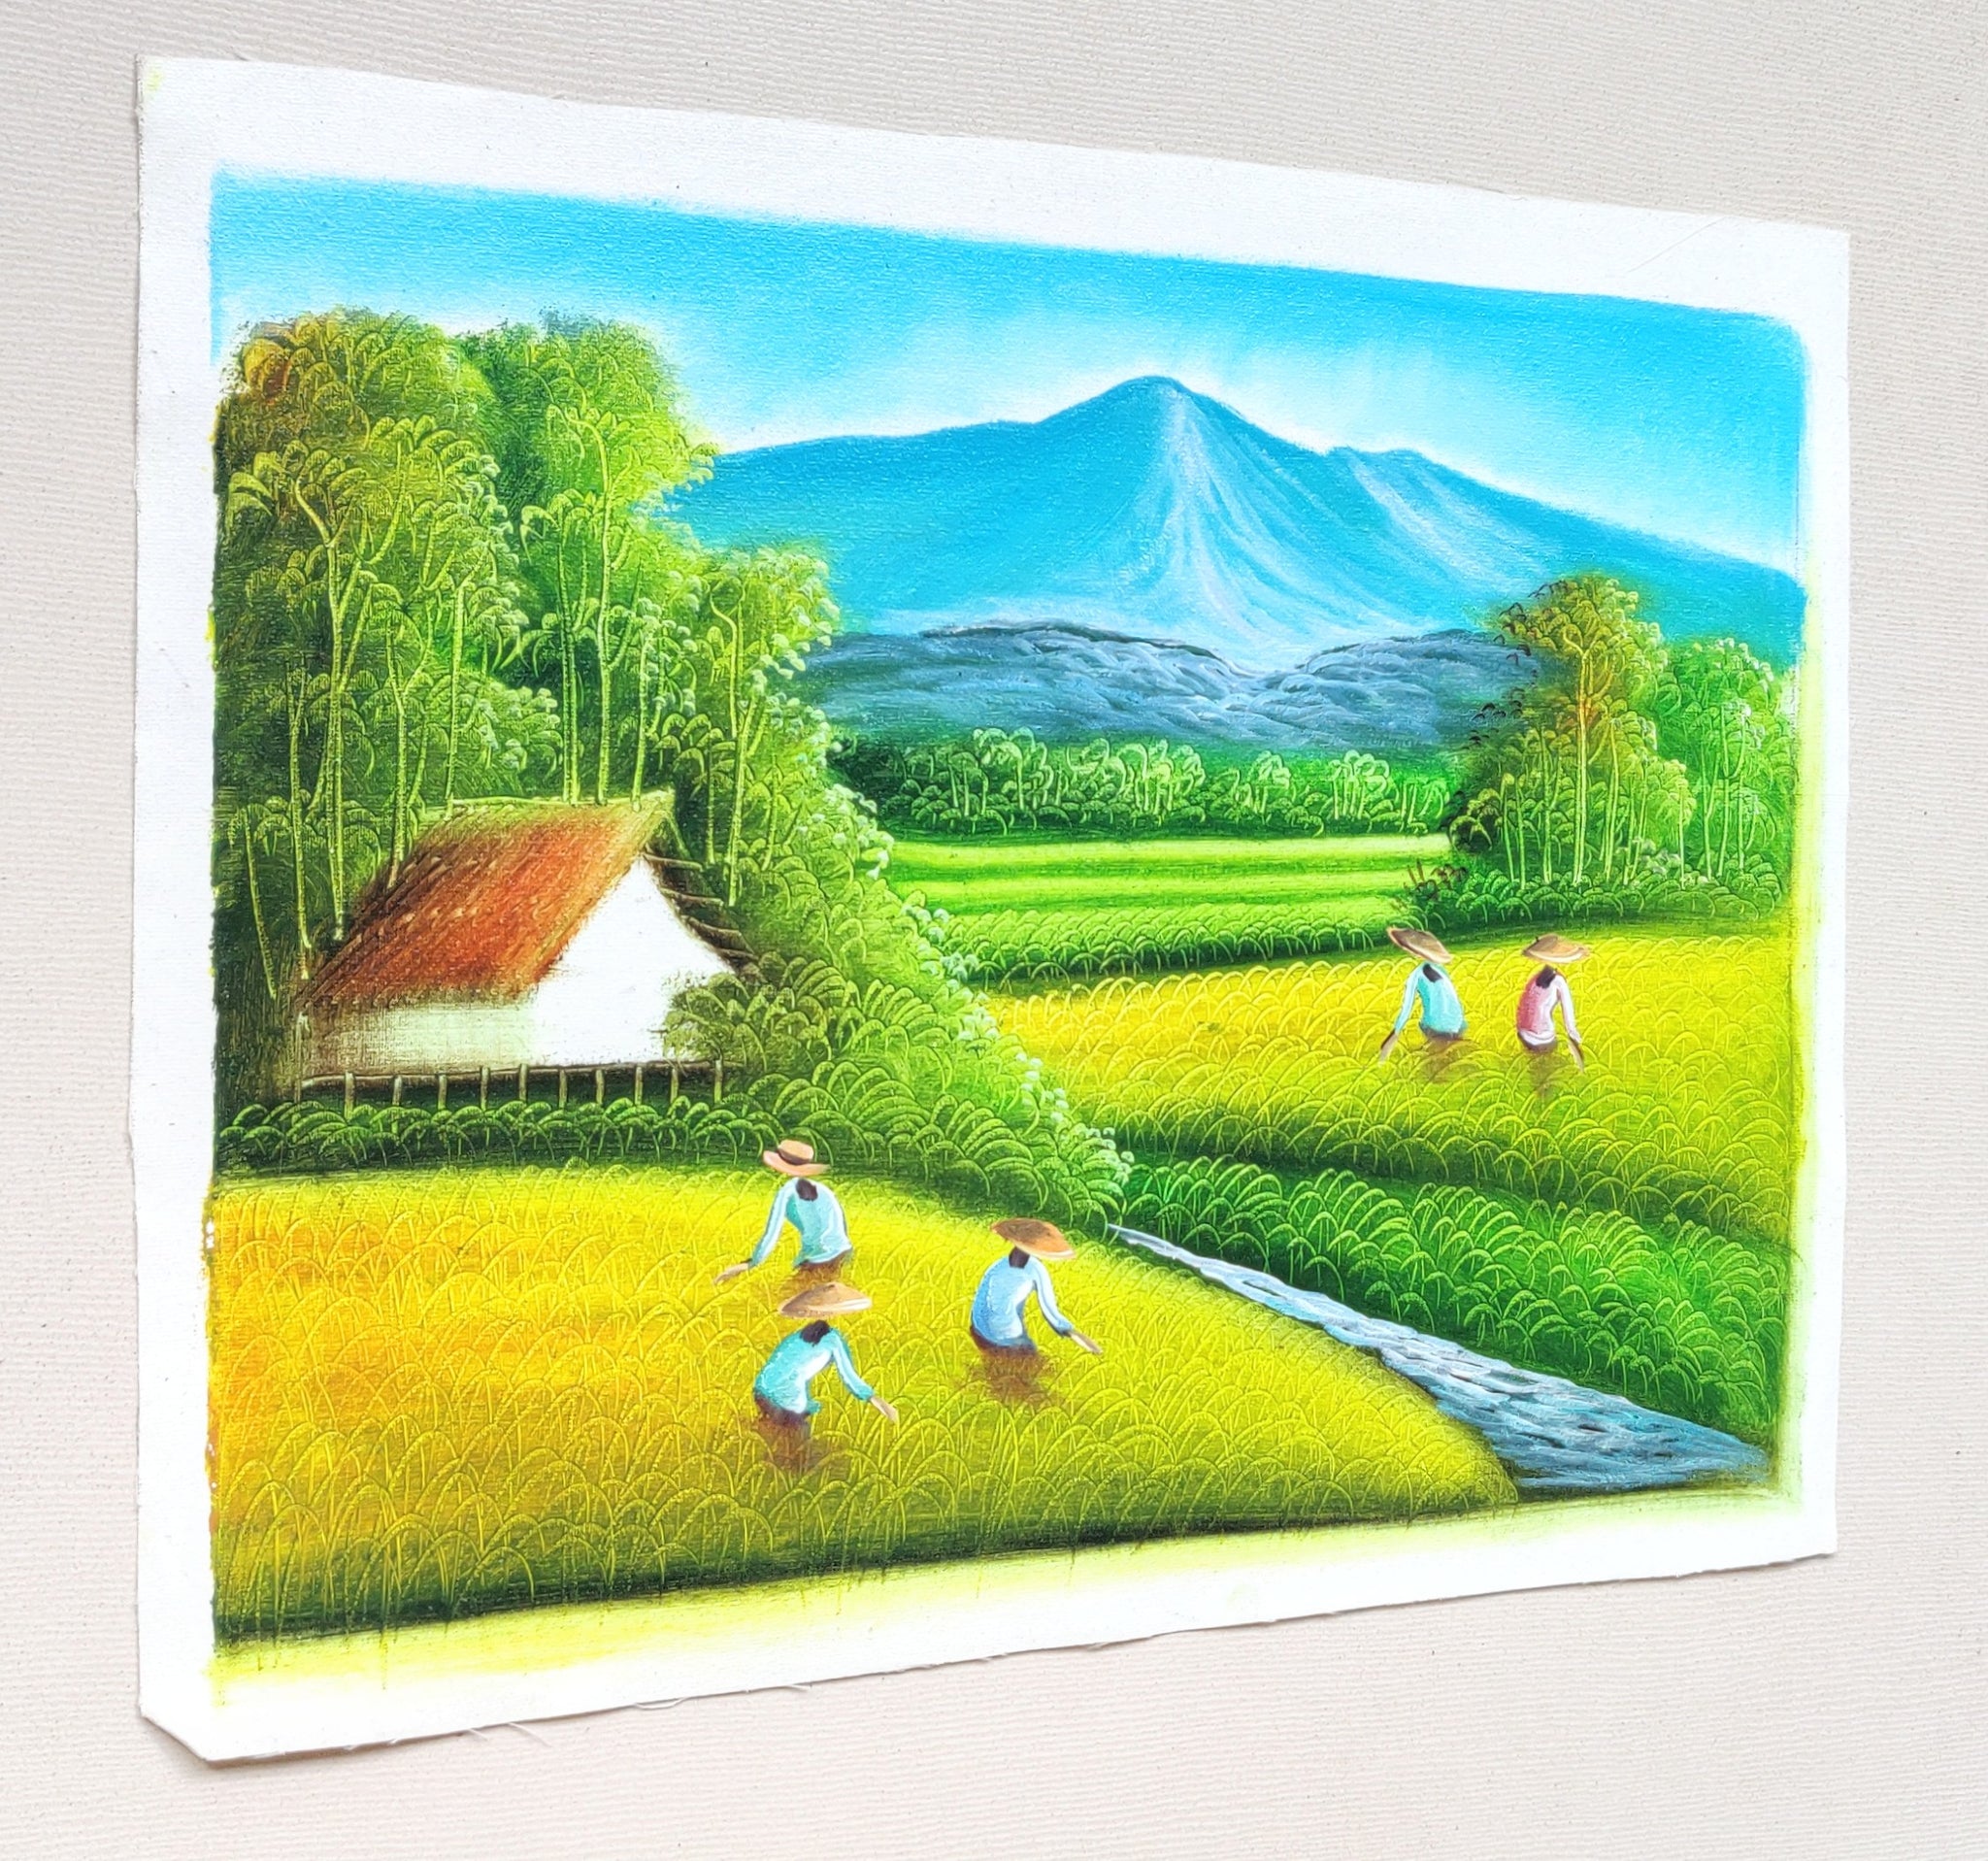 Handmade Scenery Drawing in Kohima - Dealers, Manufacturers & Suppliers  -Justdial